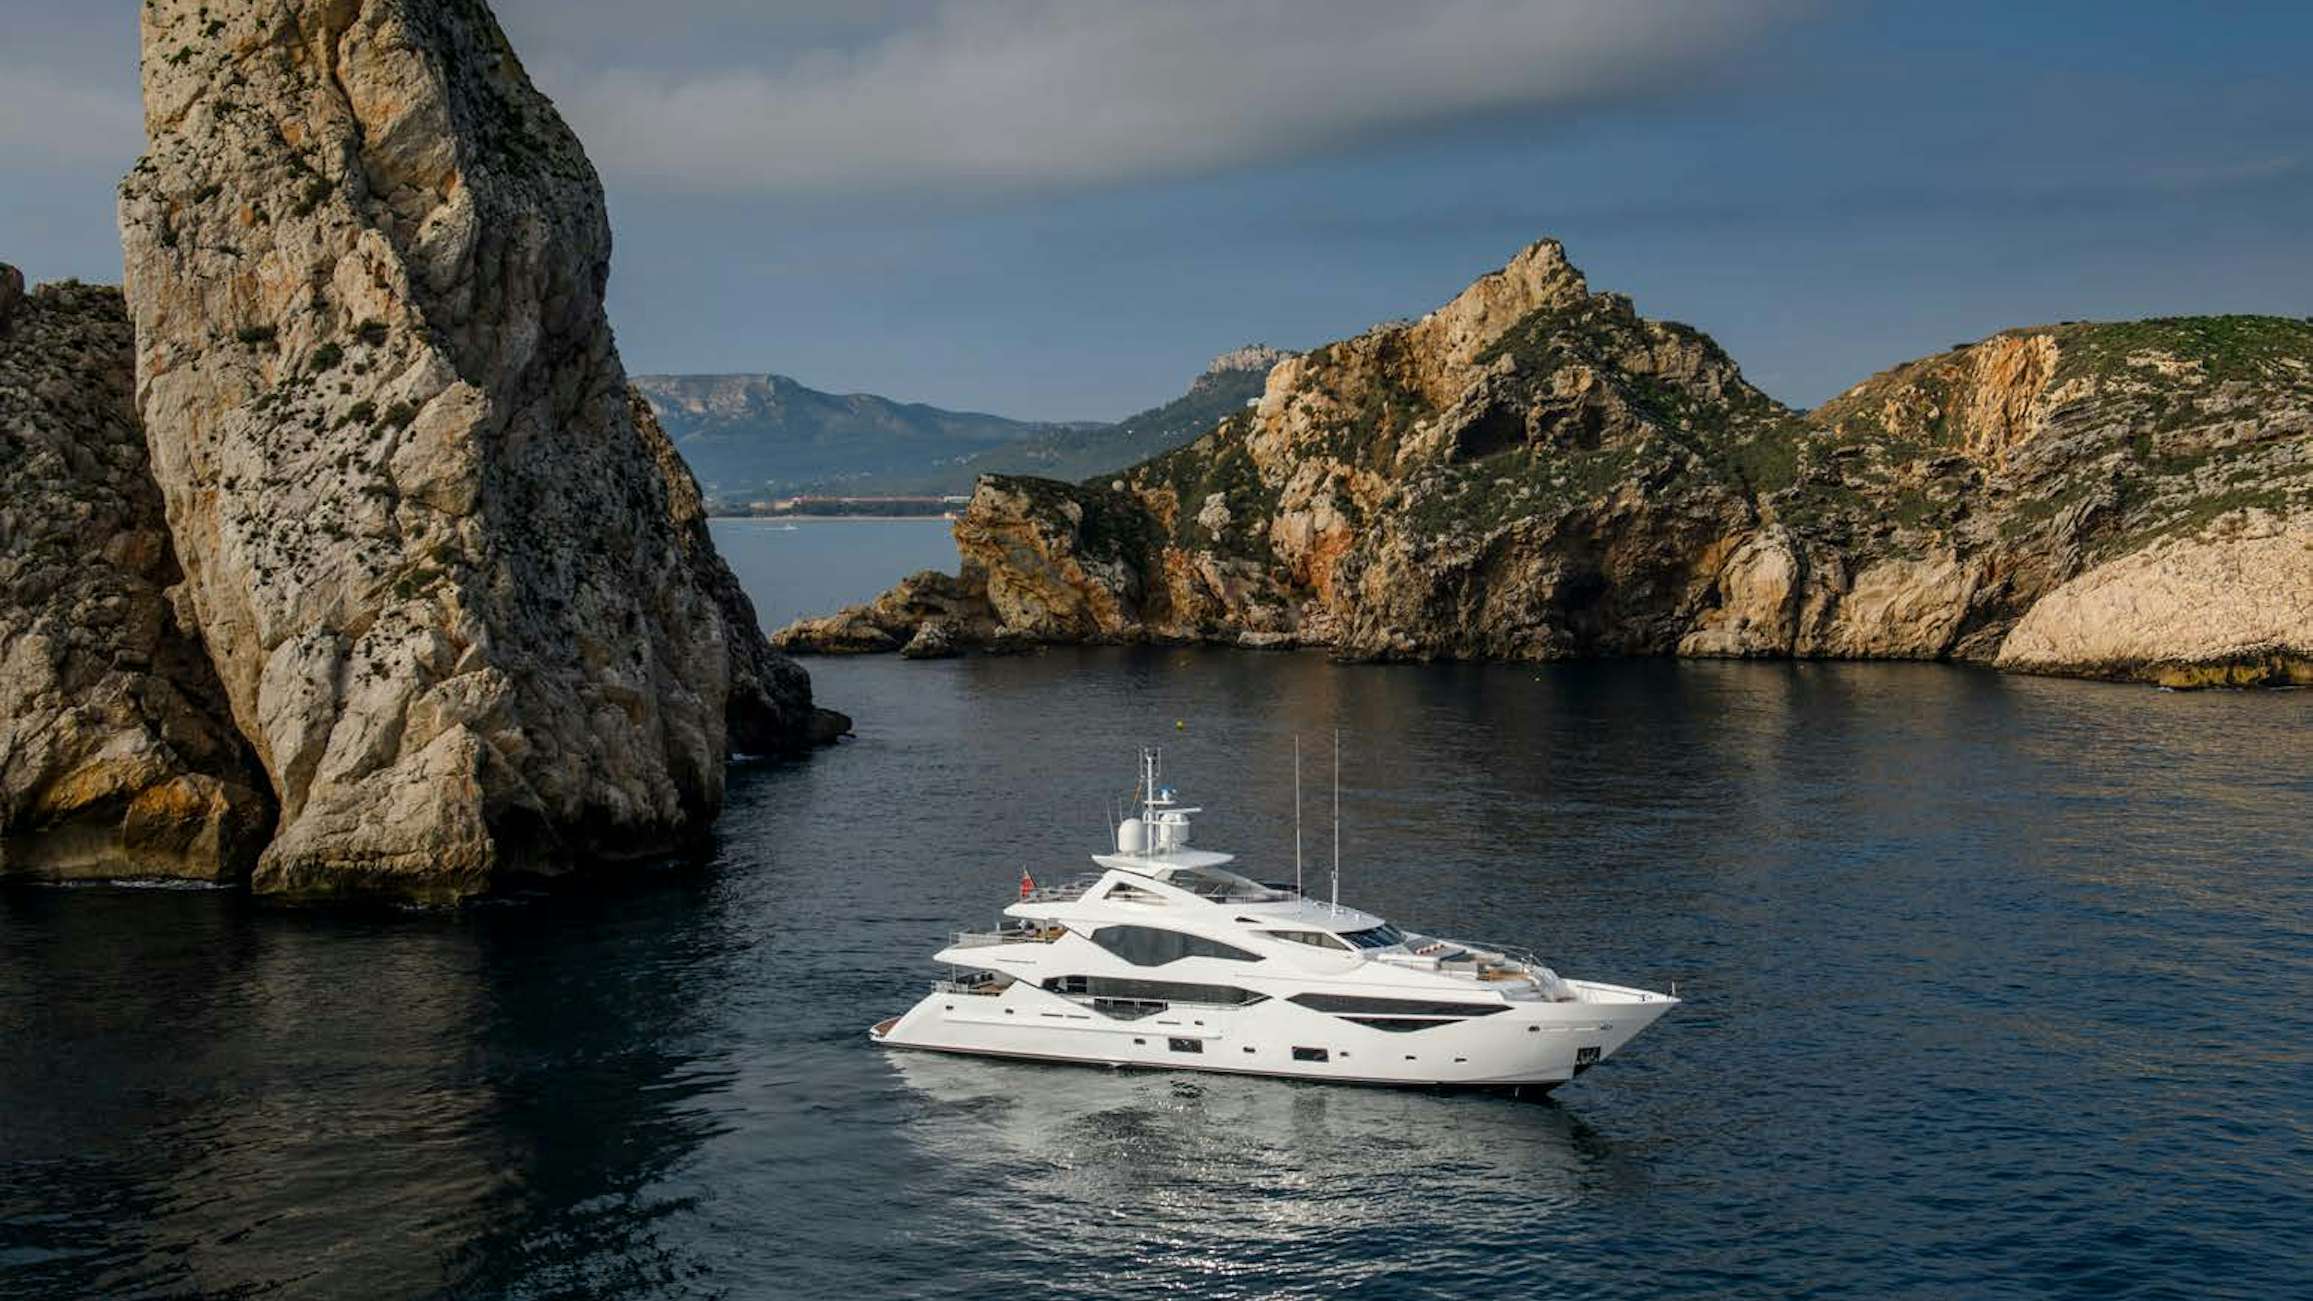 Watch Video for BERCO VOYAGER Yacht for Charter